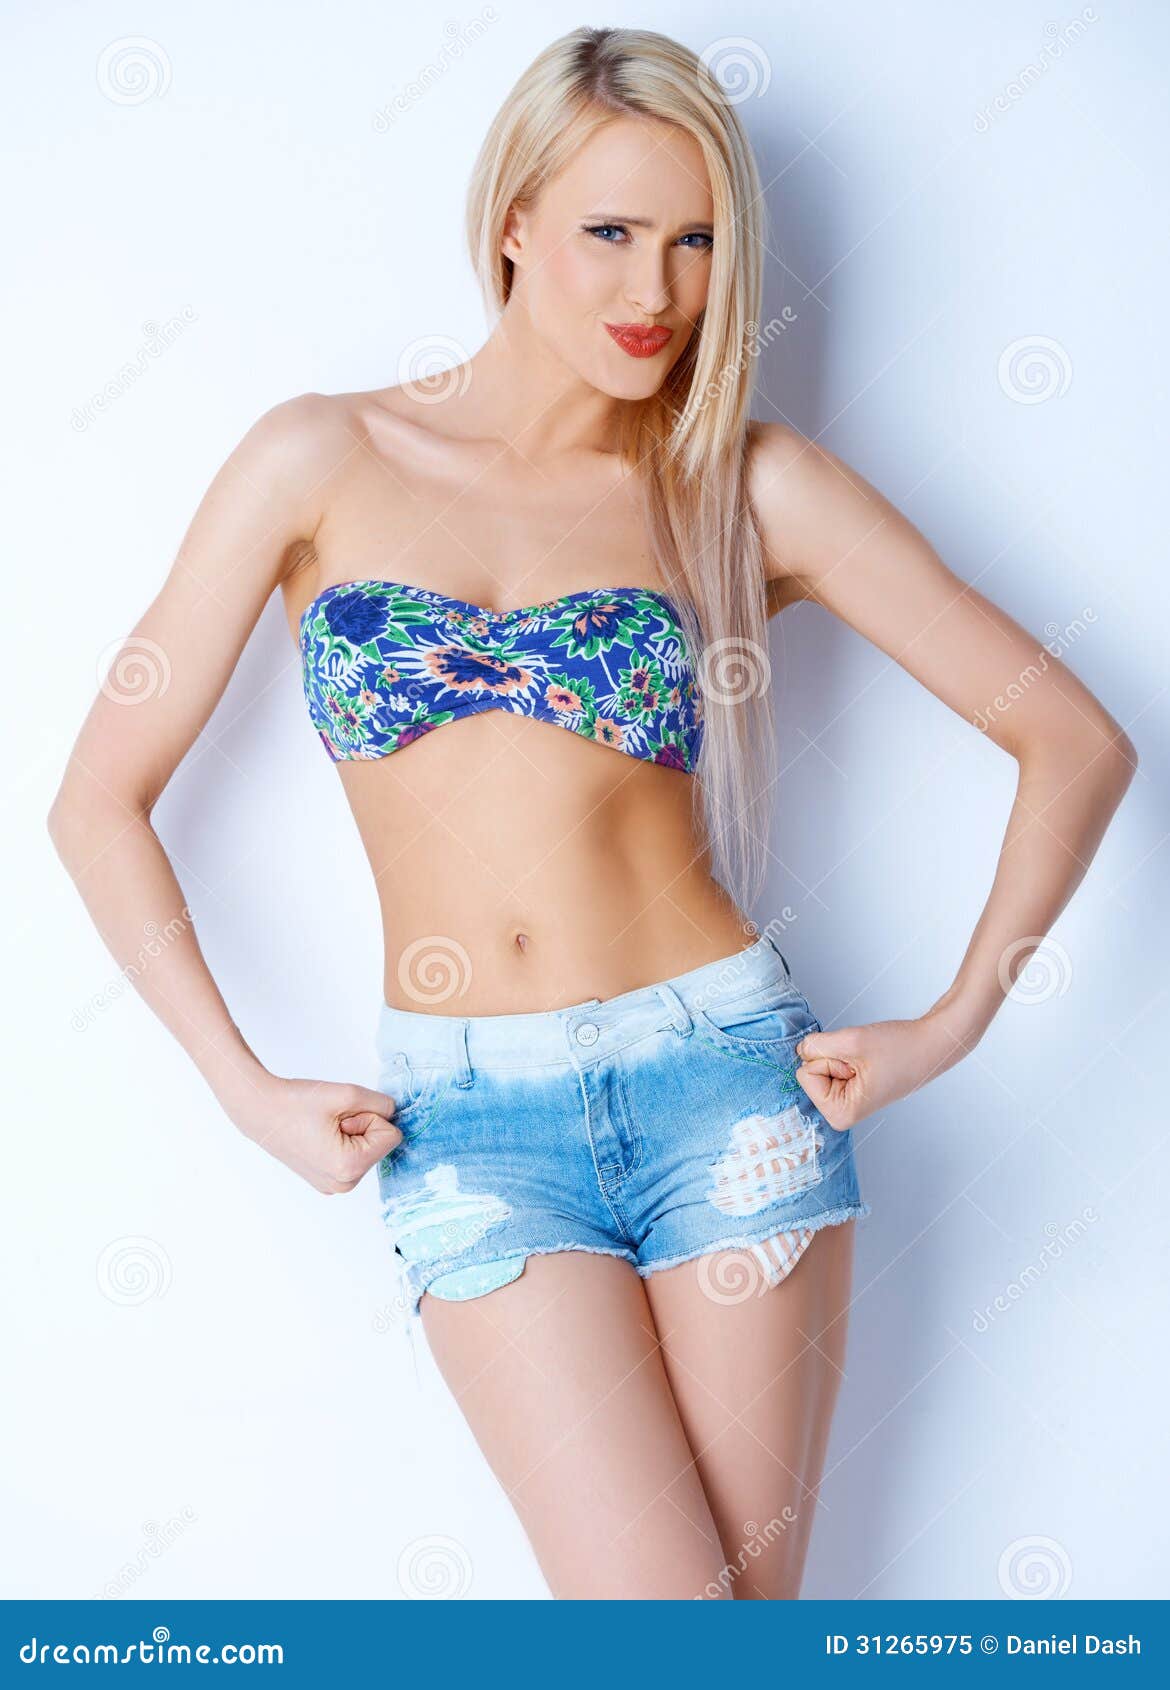 Blond Woman in Short Jeans and Bikini Bra Stock Image - Image of